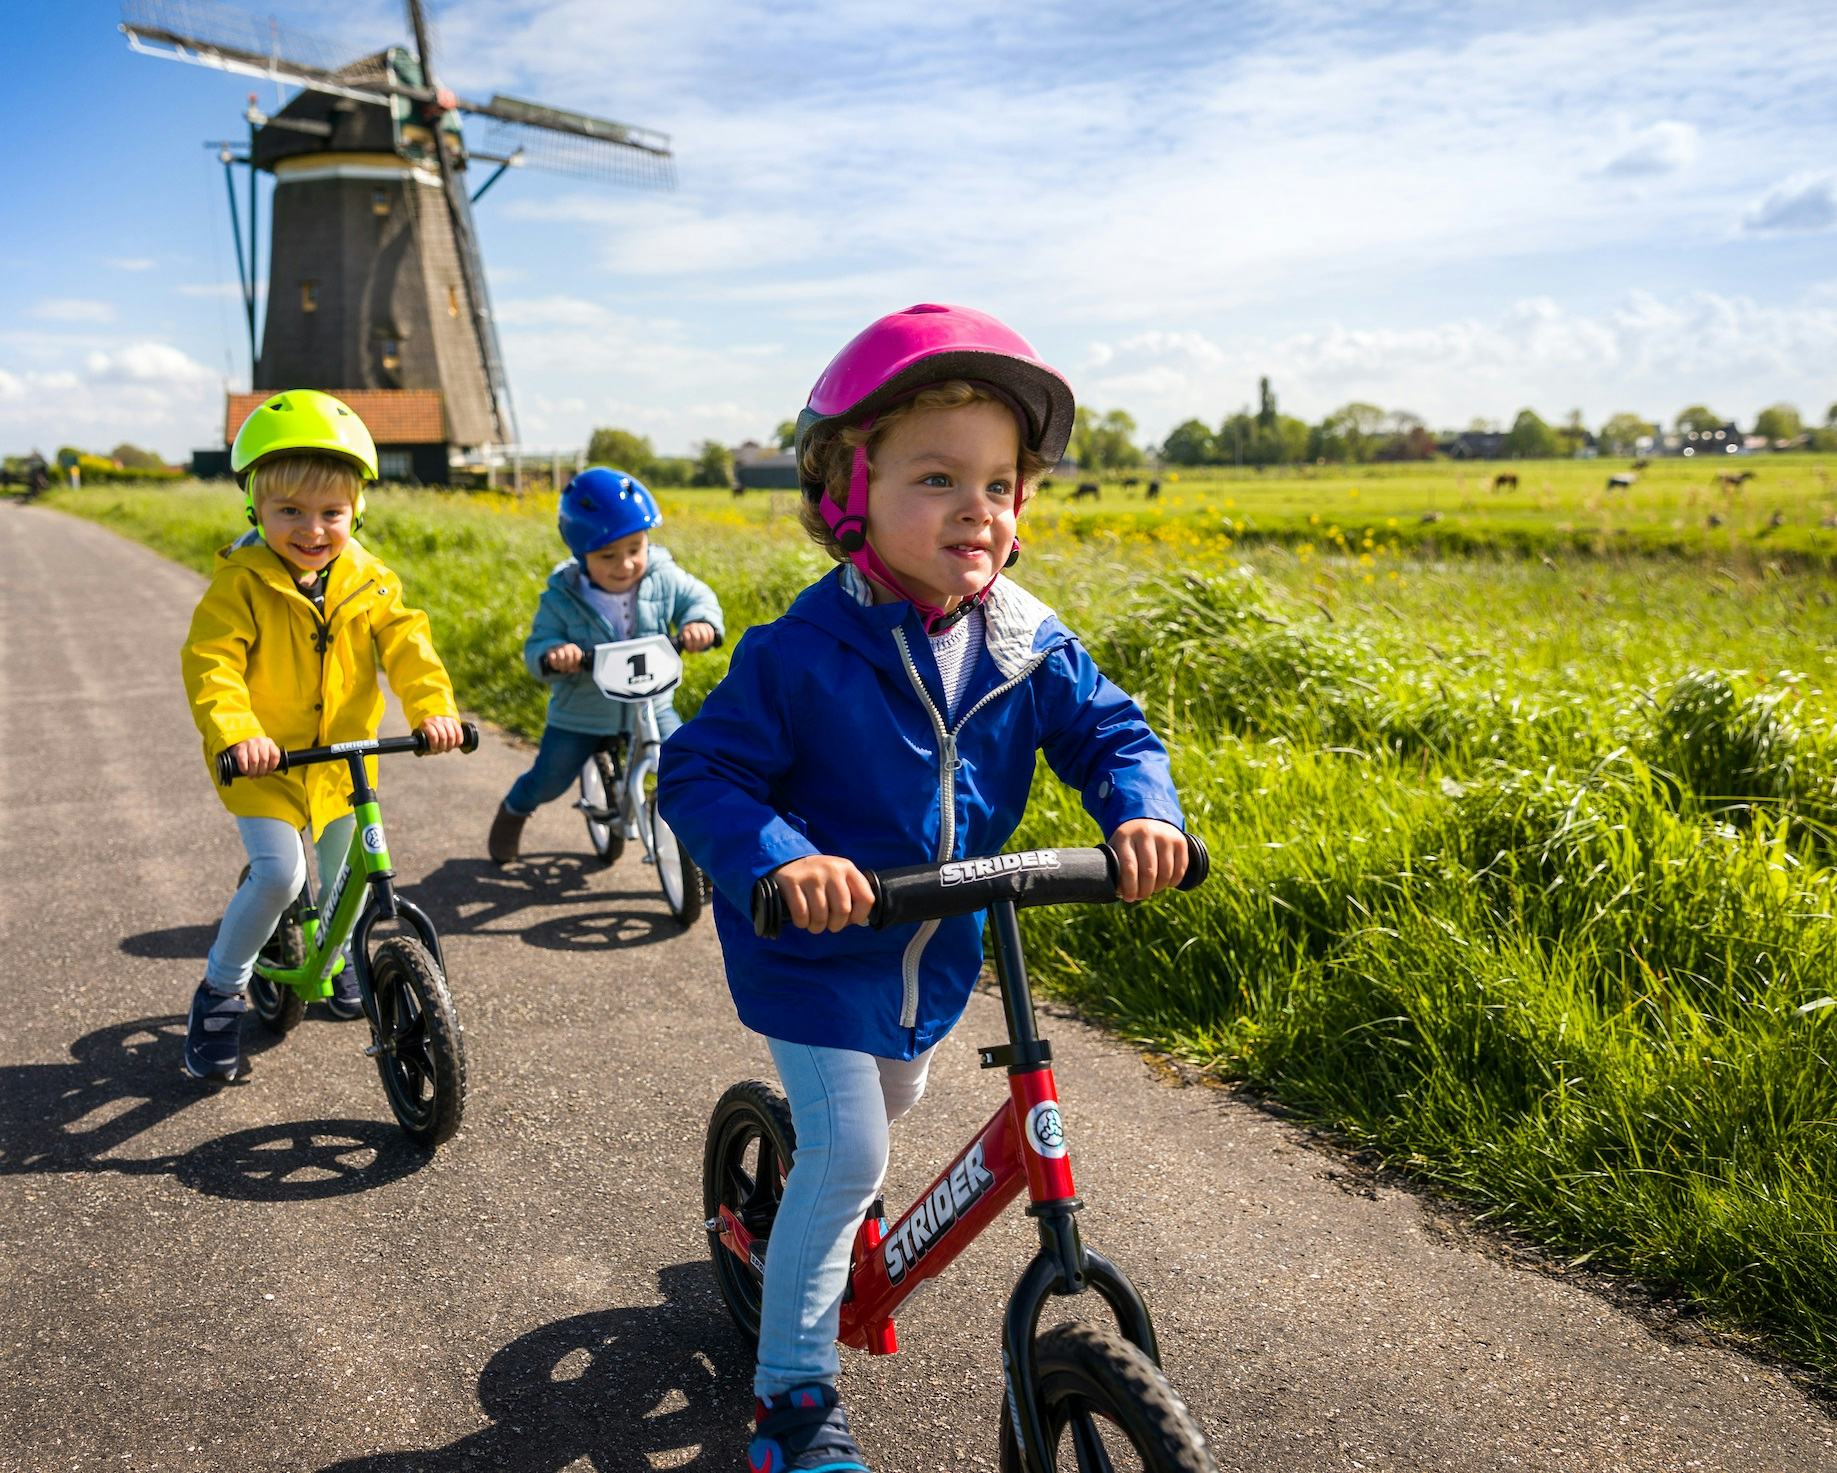 Strider balance bikes improves freedom of mobility of young children and their parents. - Photo Ronald Speijer 